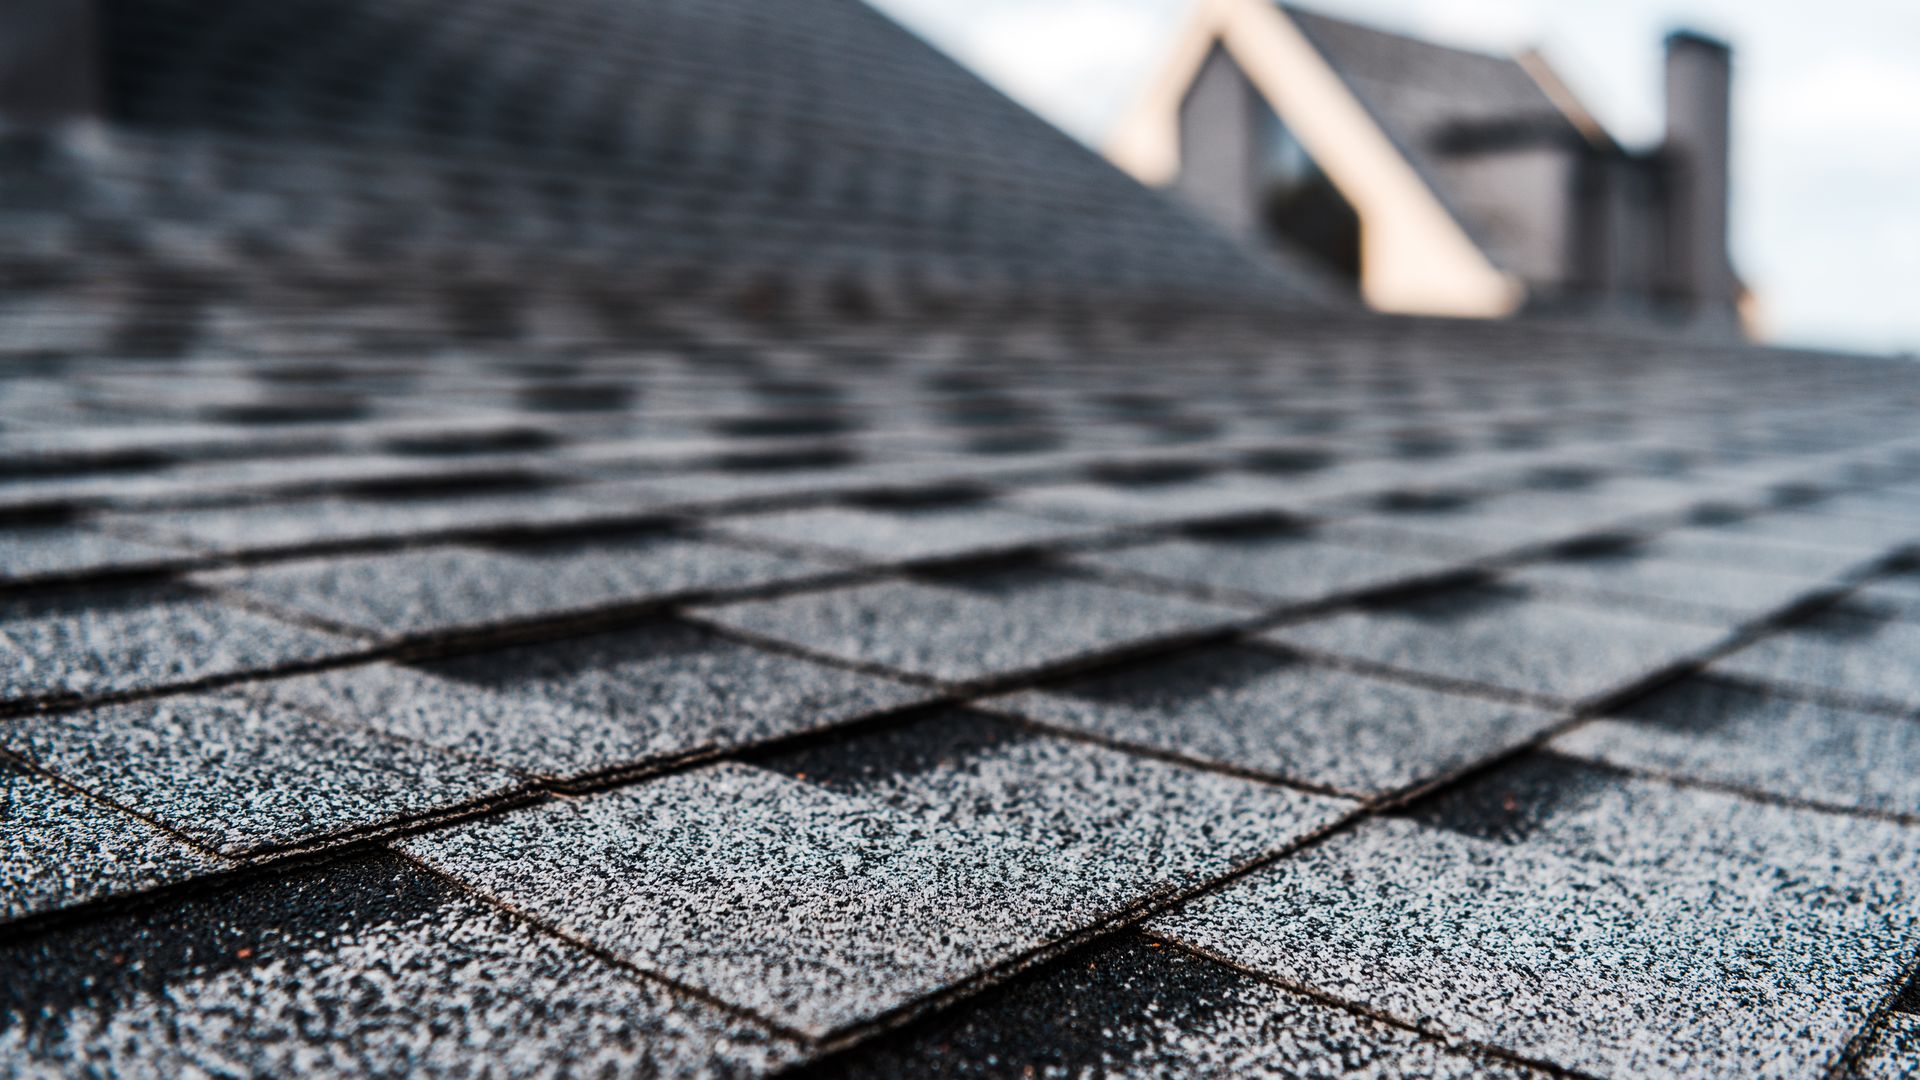 A close up of a roof with shingles on it.